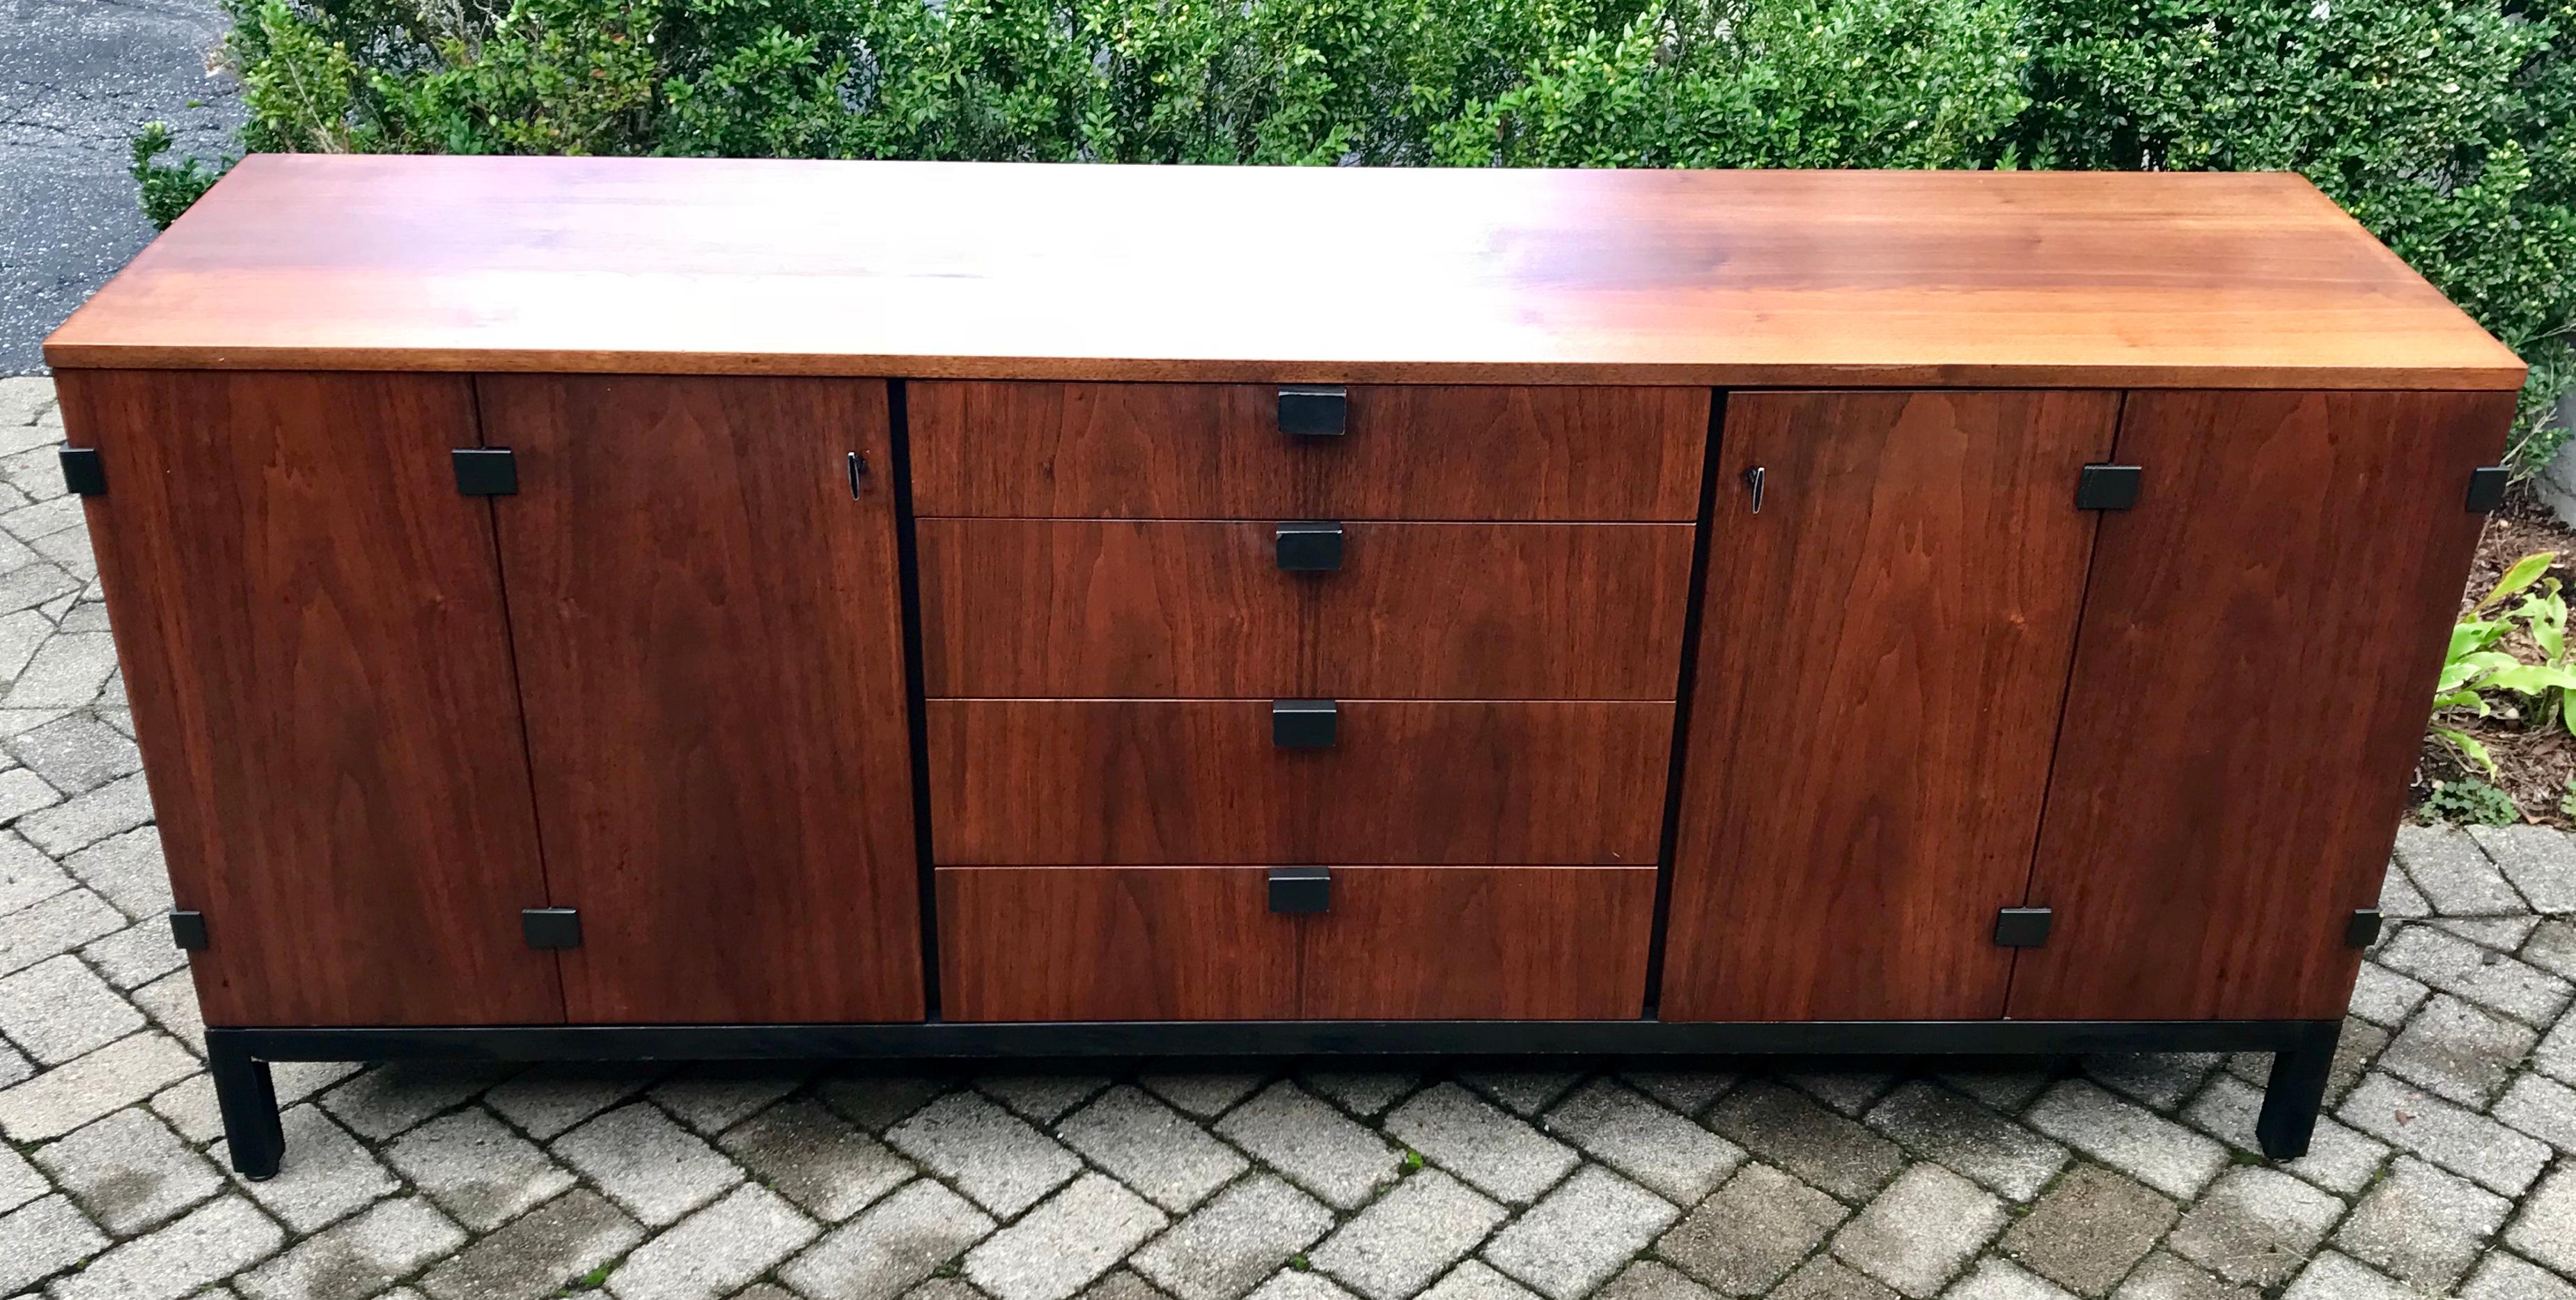 Beautiful walnut sideboard designed by Milo Baughman for Directional.

Milo Baughman was one of the most agile and adept modern American furniture designers of the late 20th century. A prolific lecturer and writer on the benefits of good design —